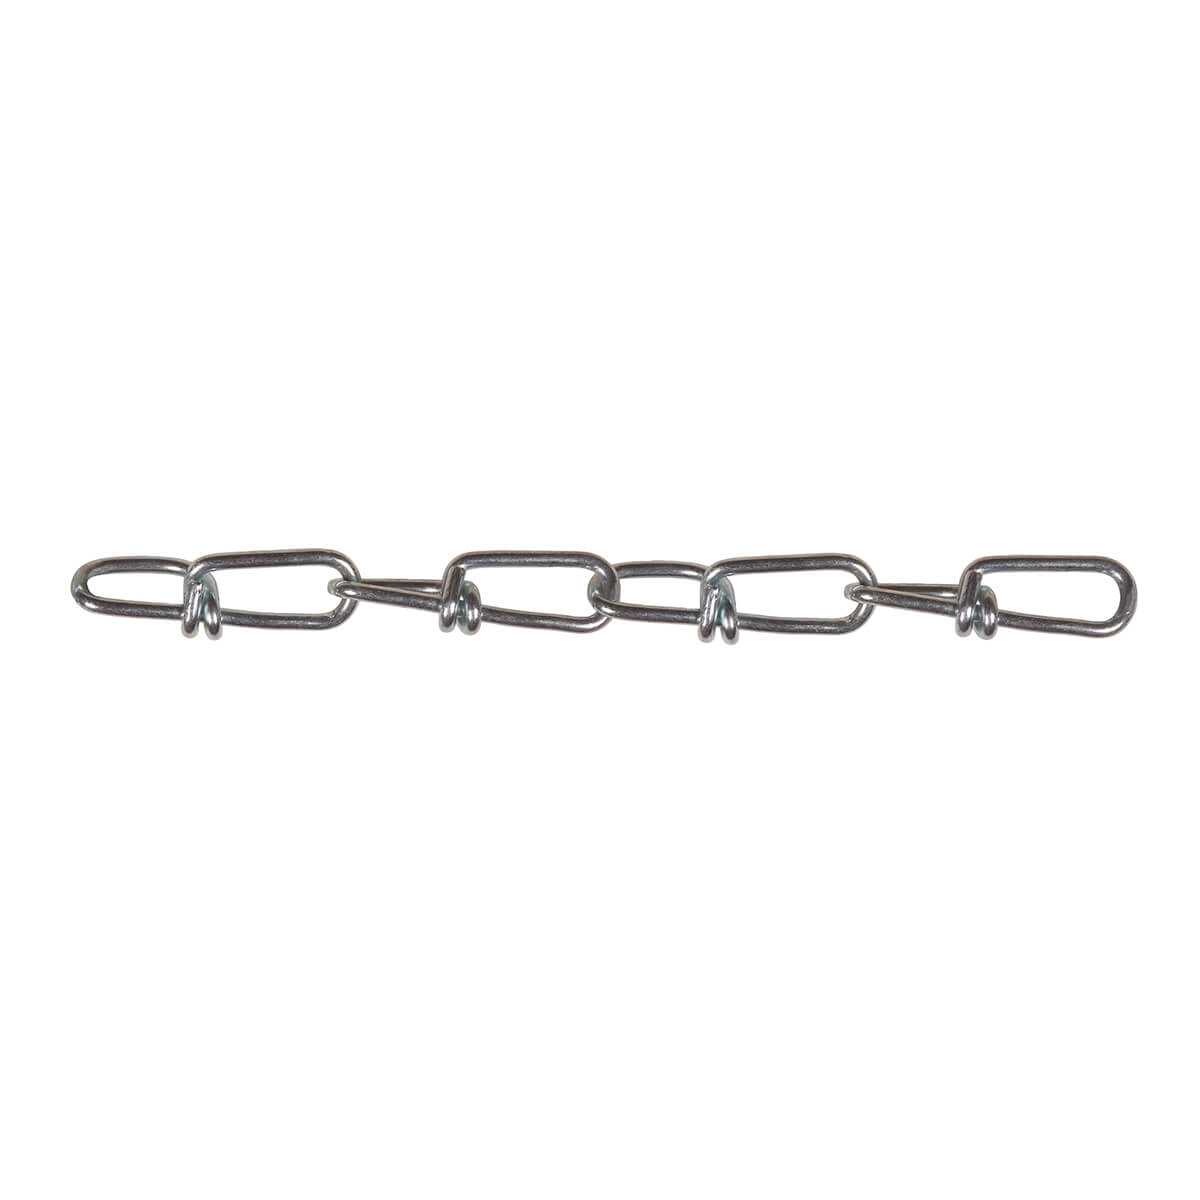 Electrical Fixture Chain - Double Loop